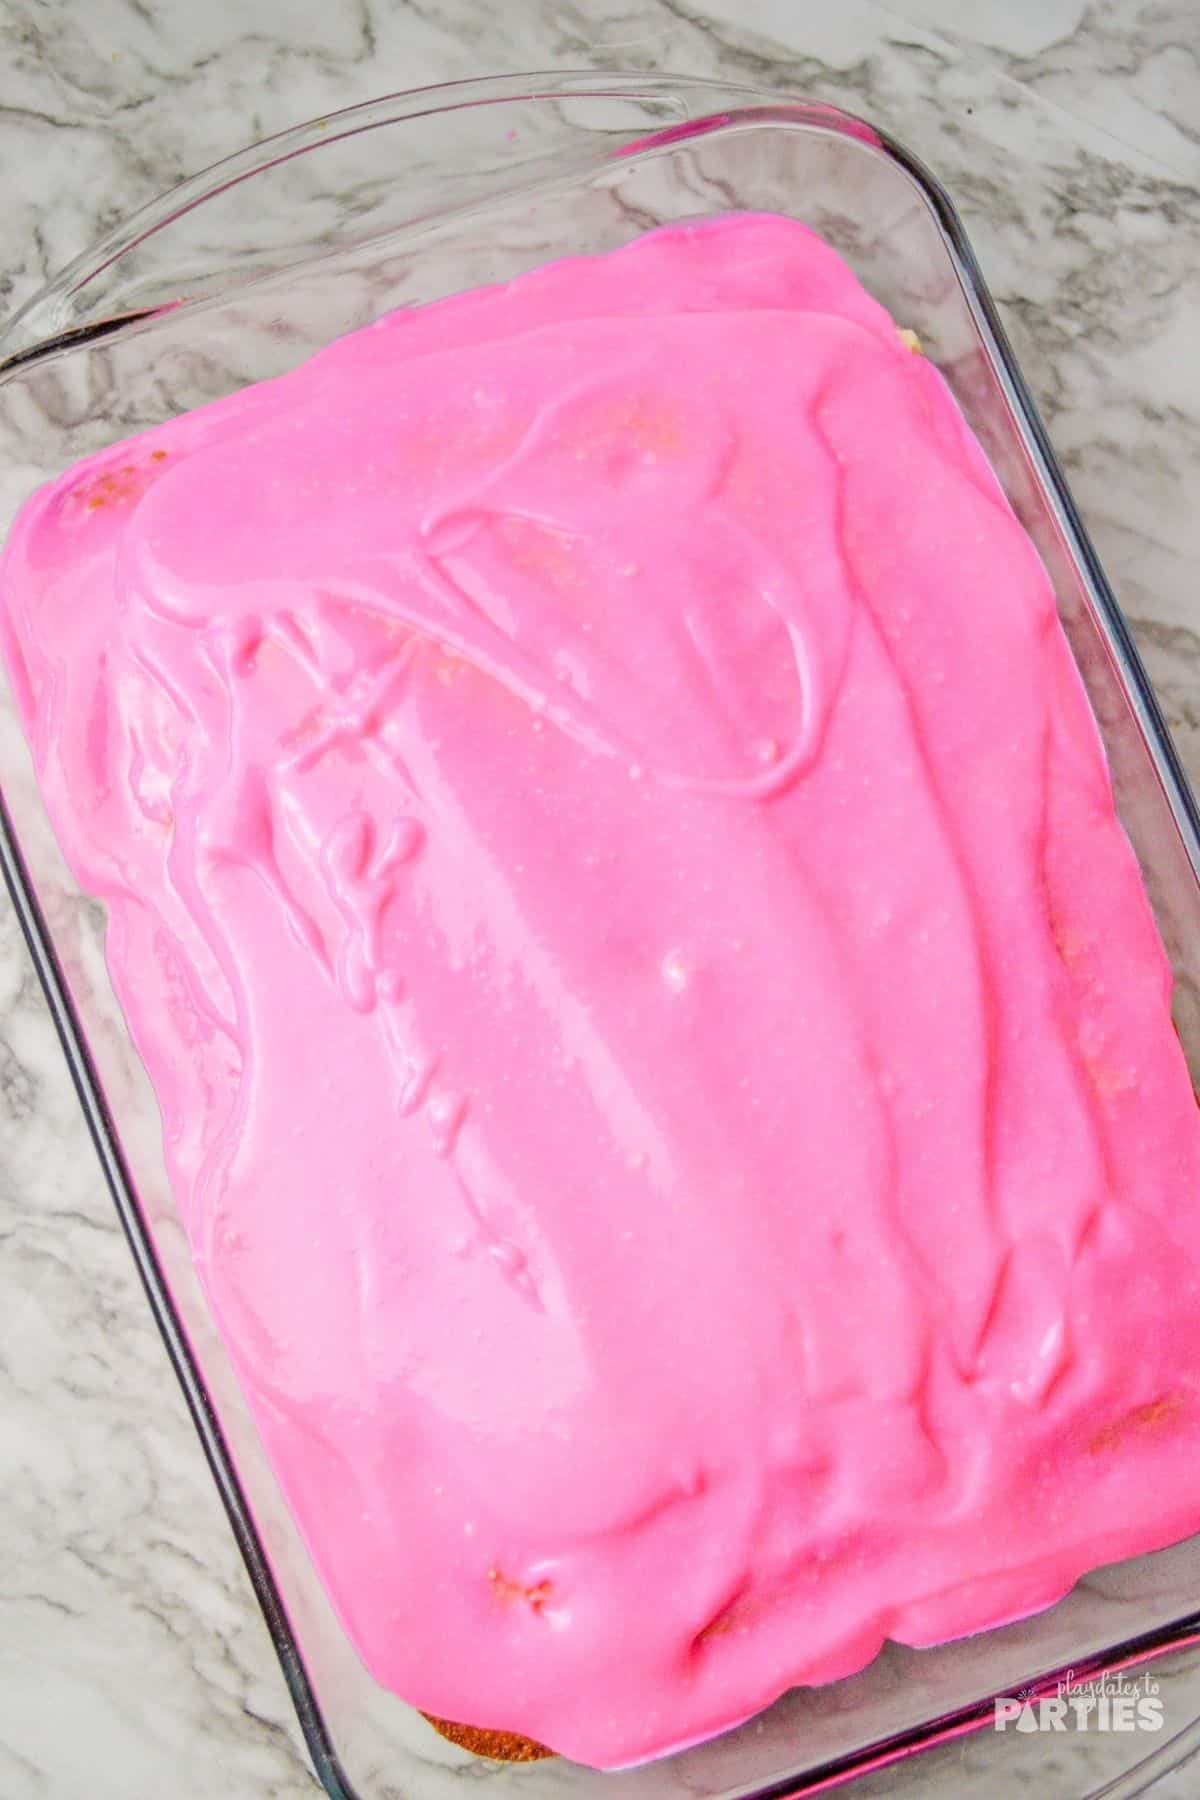 Pouring pink pudding mix over the poke cake.